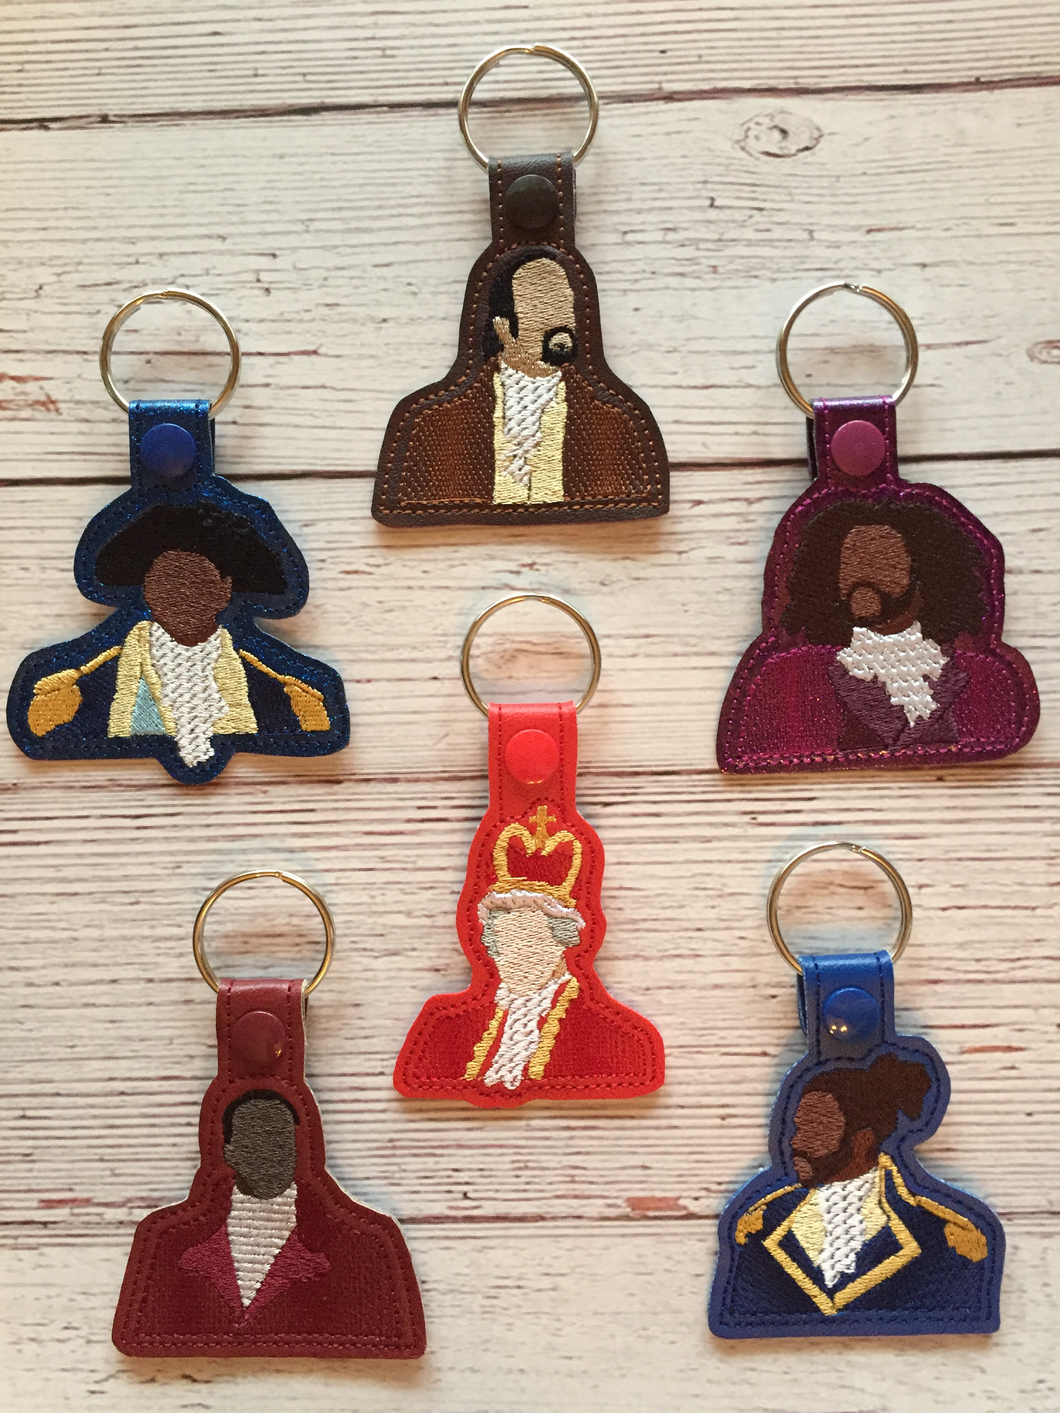 Key Fobs Inspired By Historical Figures - Keychains - Backpack Decoration - Bag Bling